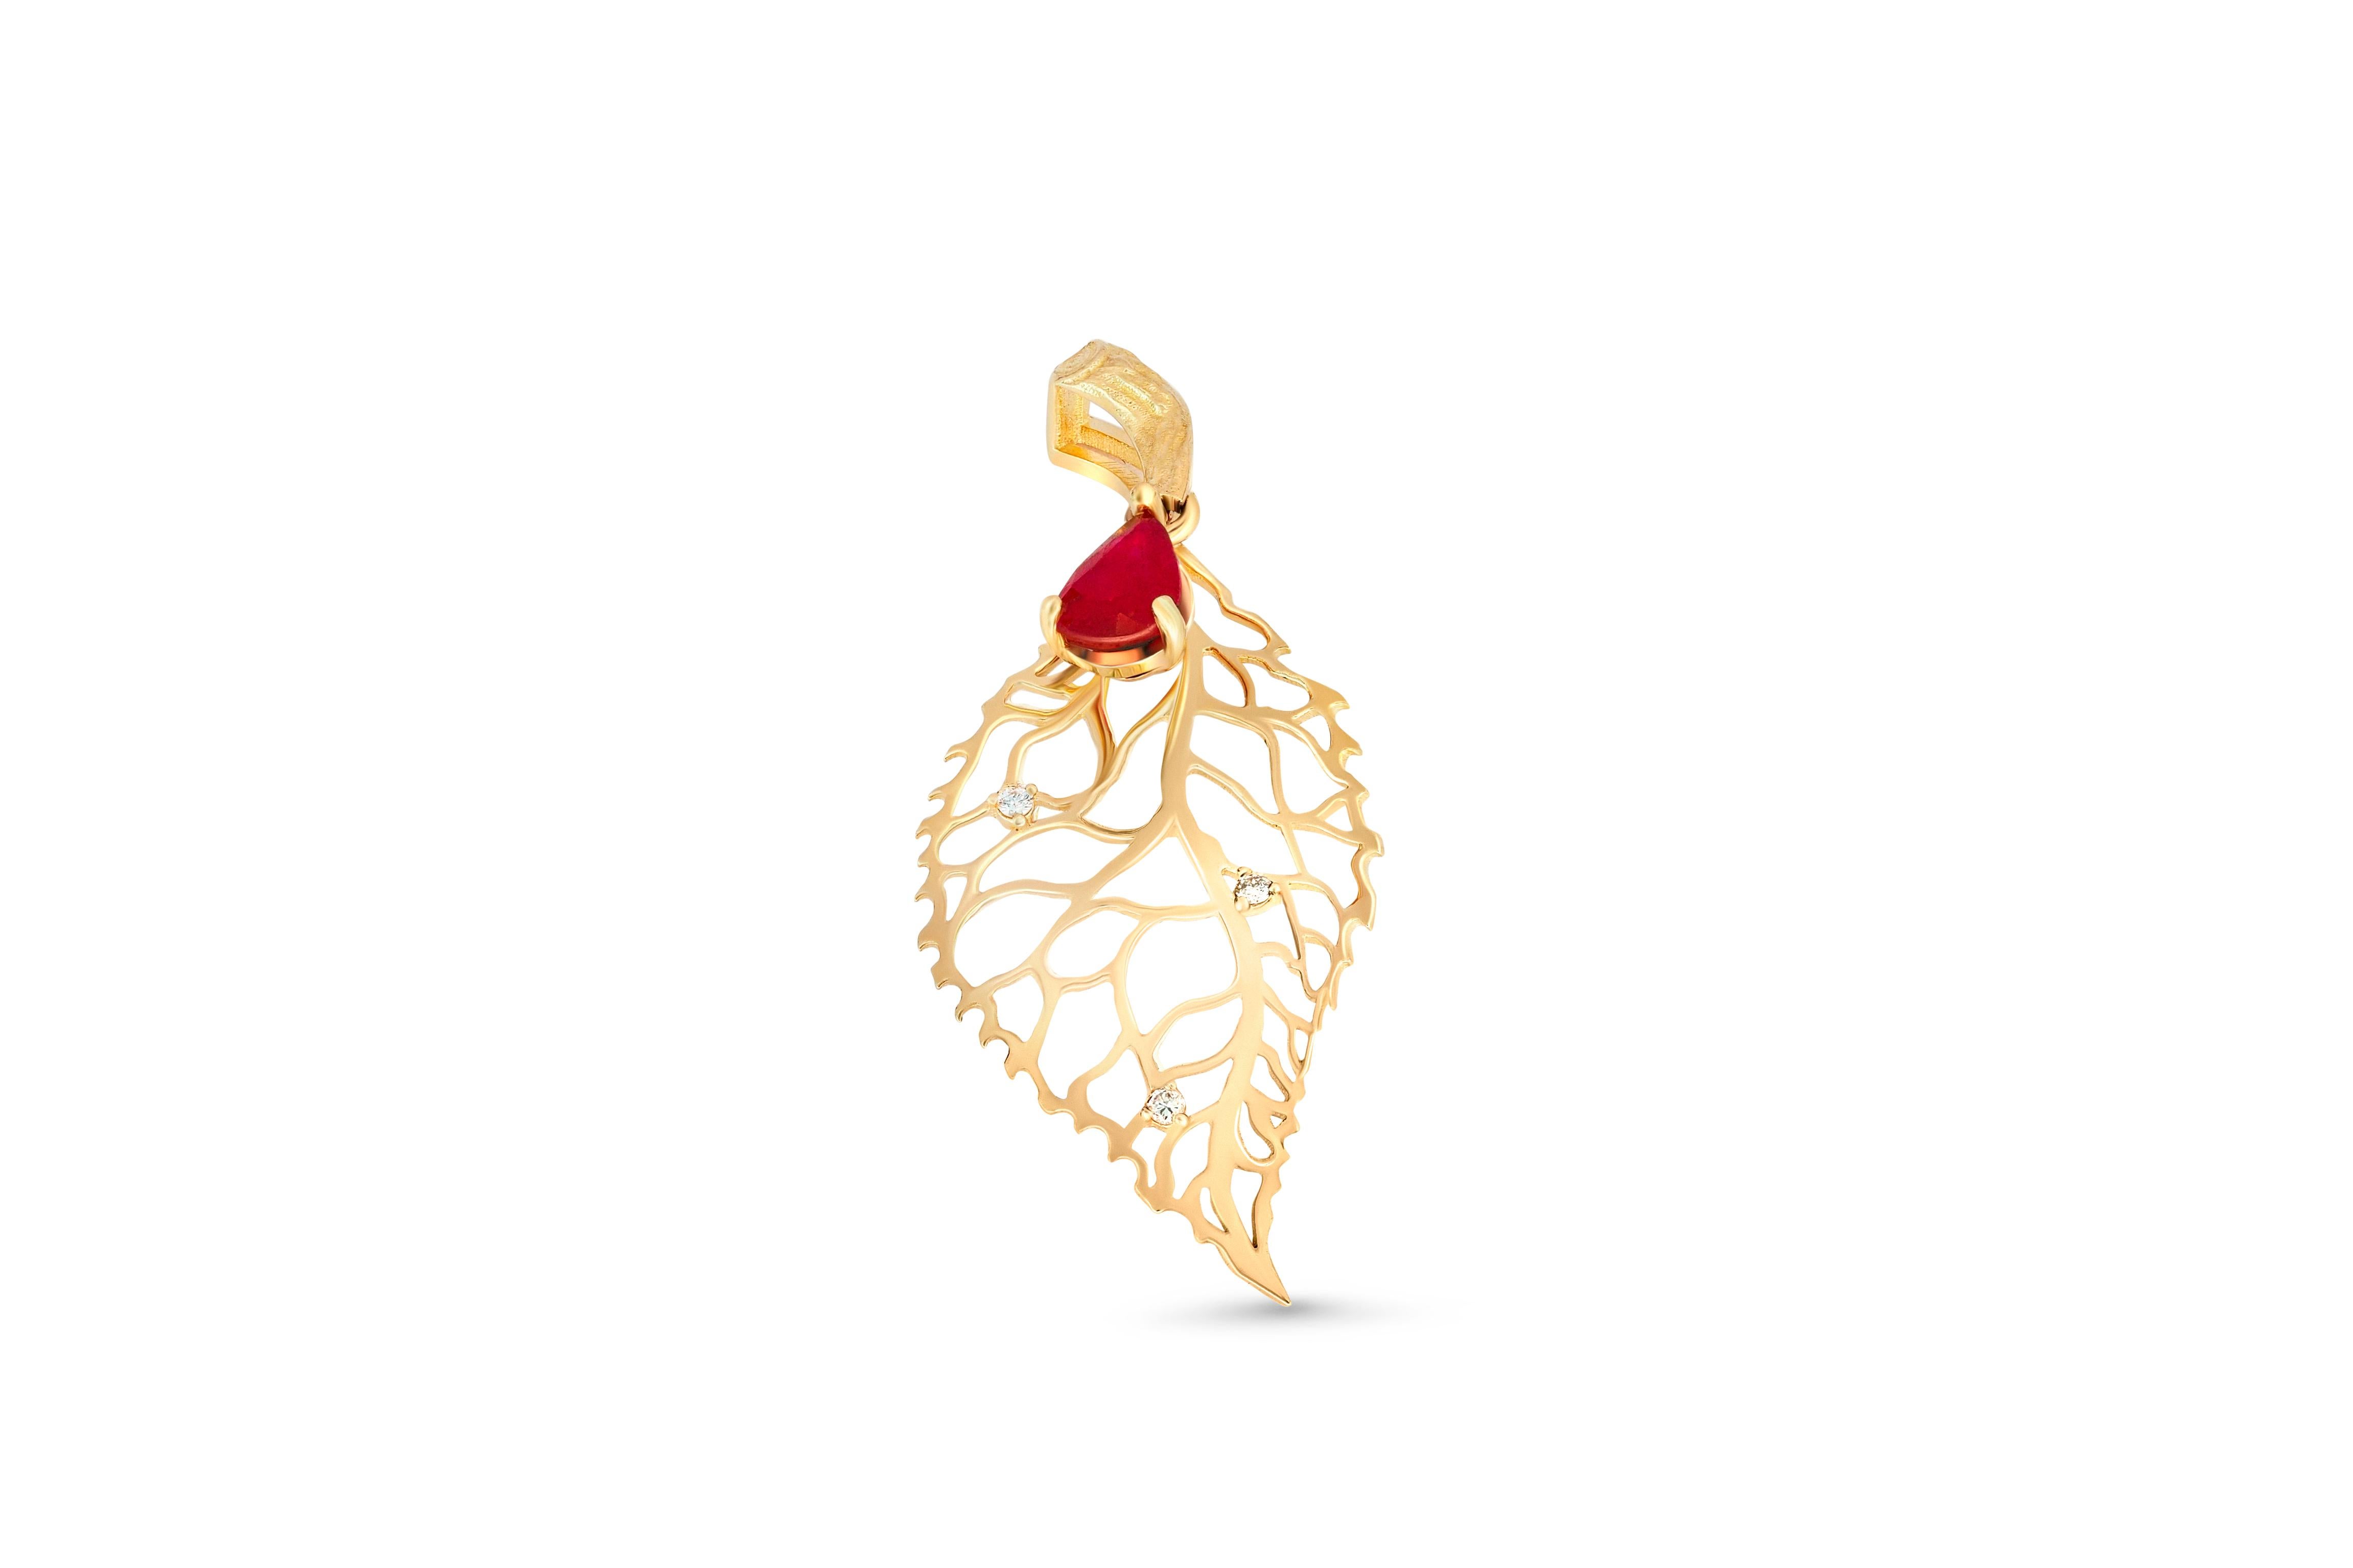 Leaf pendant with ruby and diamonds. 
14k gold leaf pendant. Pear ruby pendant. Genuine ruby pendant. Small Leaf, Mini Charm Necklace.

Weight: 1.3 g.
Gold - 14k  gold.
Pendant size in mm - 37х14.86 mm. 

Central stone:ruby
Cut: pear
Weight: 0.75